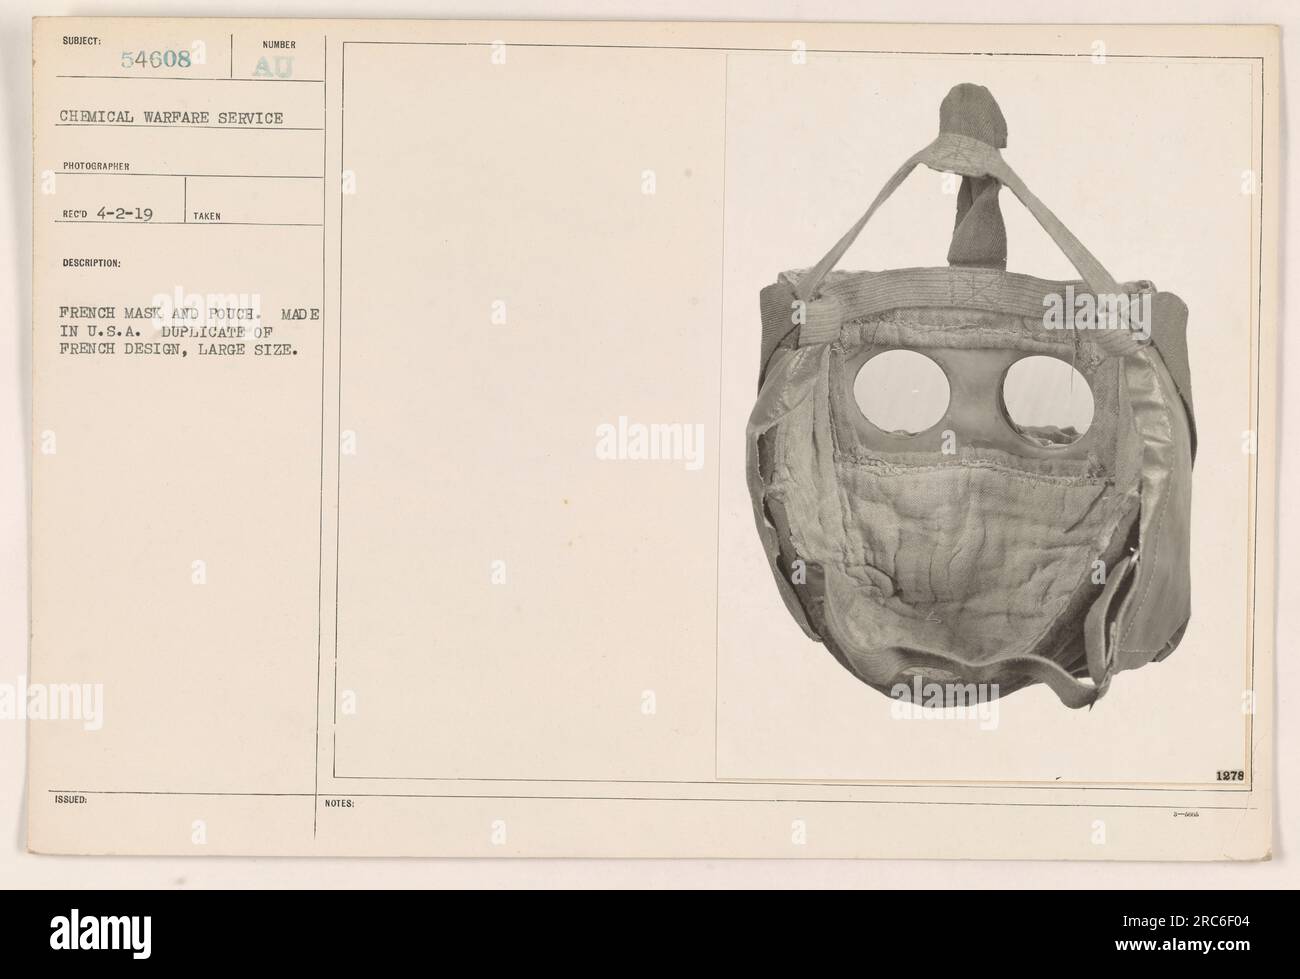 Image of a French mask and pouch, which was manufactured in the USA during World War I. The design is a duplicate of the original French design and is specifically in a large size. This equipment was used by the Chemical Warfare Service. The photograph was taken on April 2, 1919, and is assigned the number AU. Stock Photo